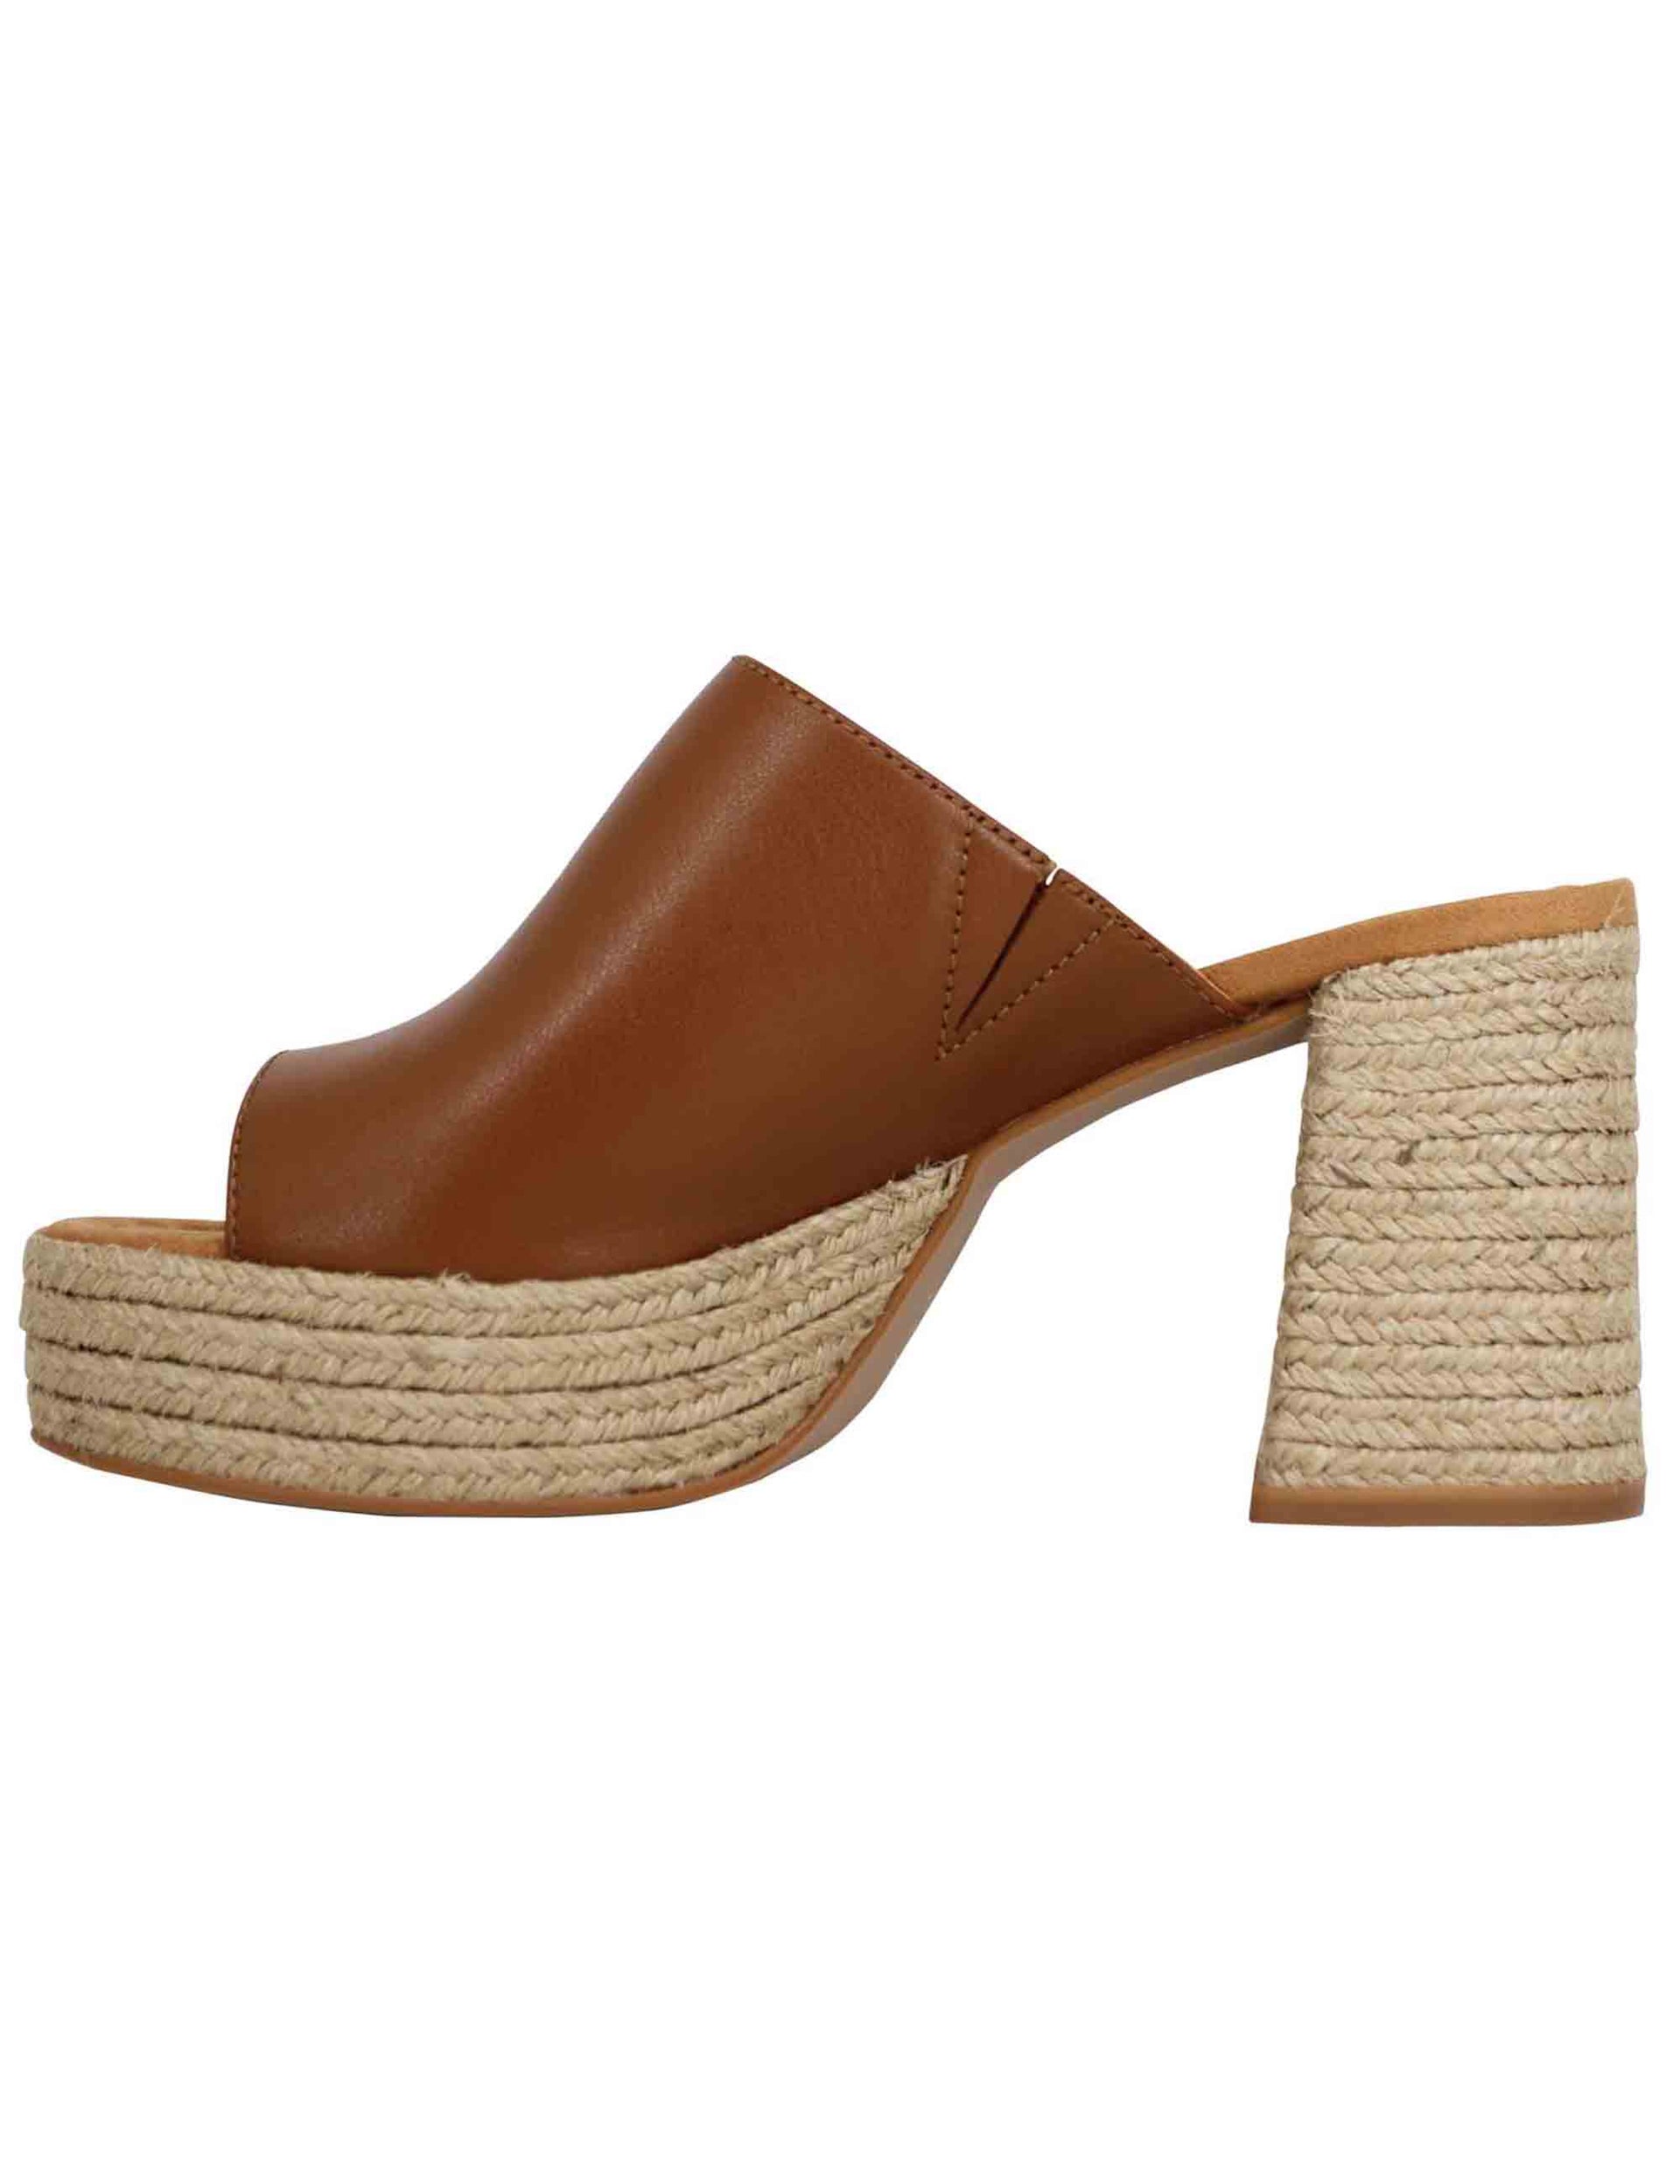 Women's sandals in tan leather with high heel and rope plateau